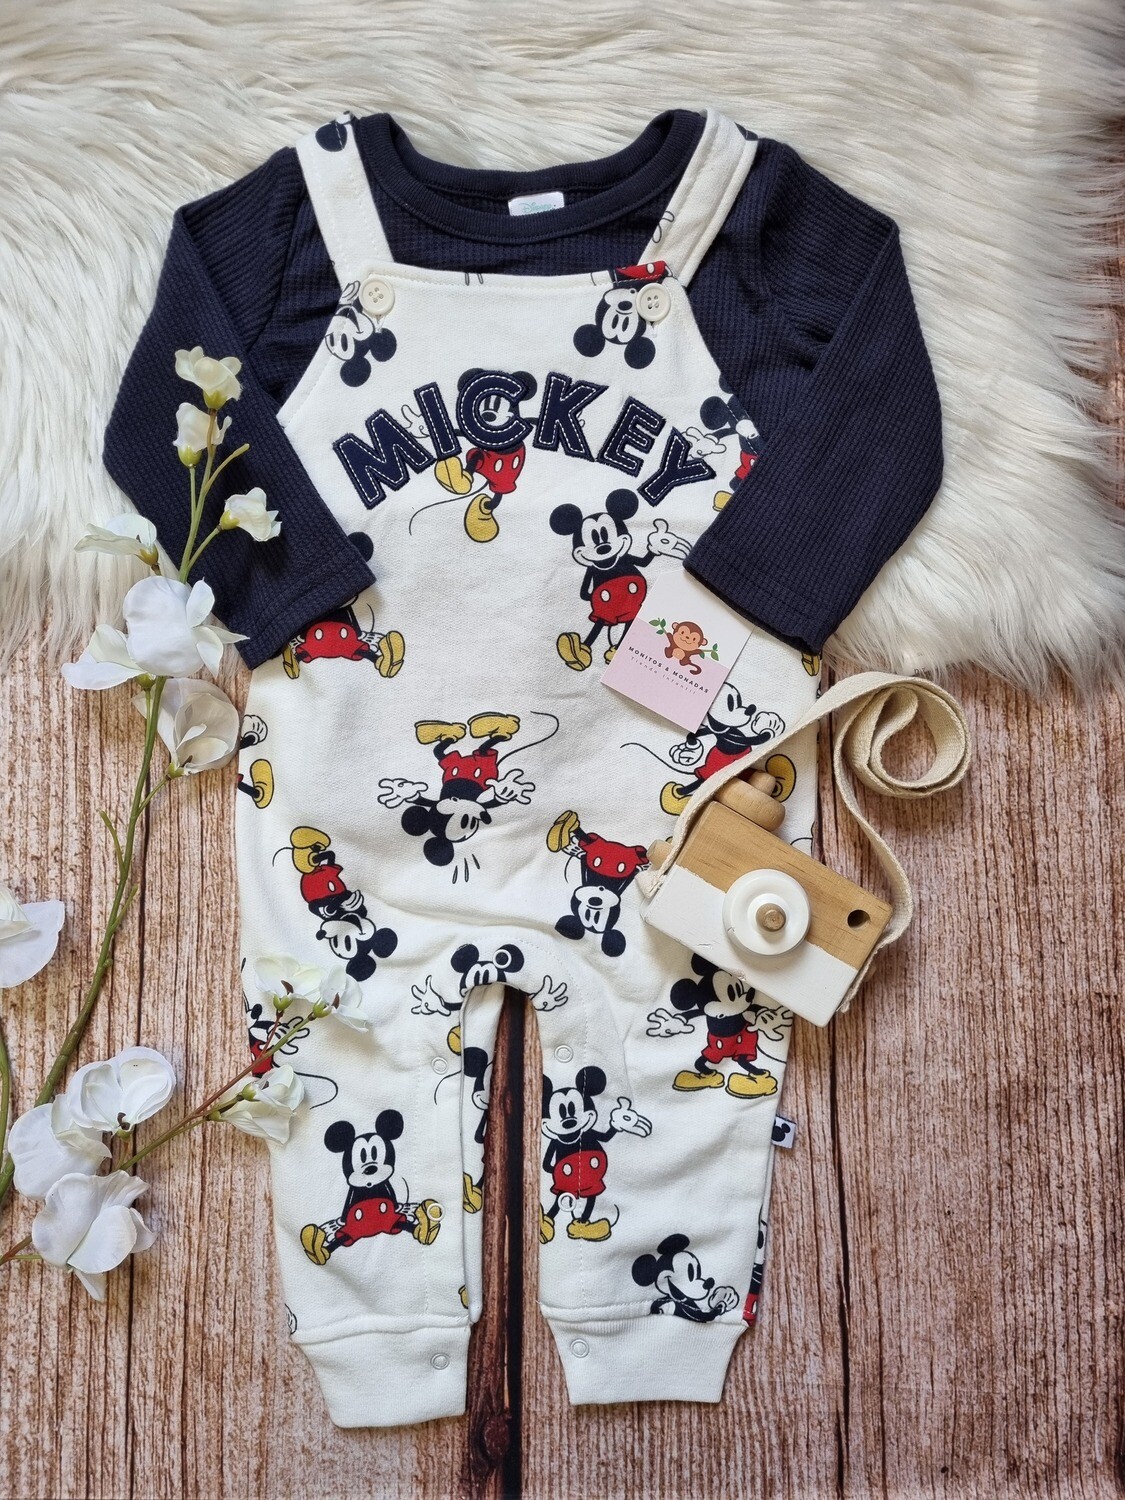 Set 2 piezas Mickey Mouse, overall + busito azul, 0 a 3m y 6 a 9m.